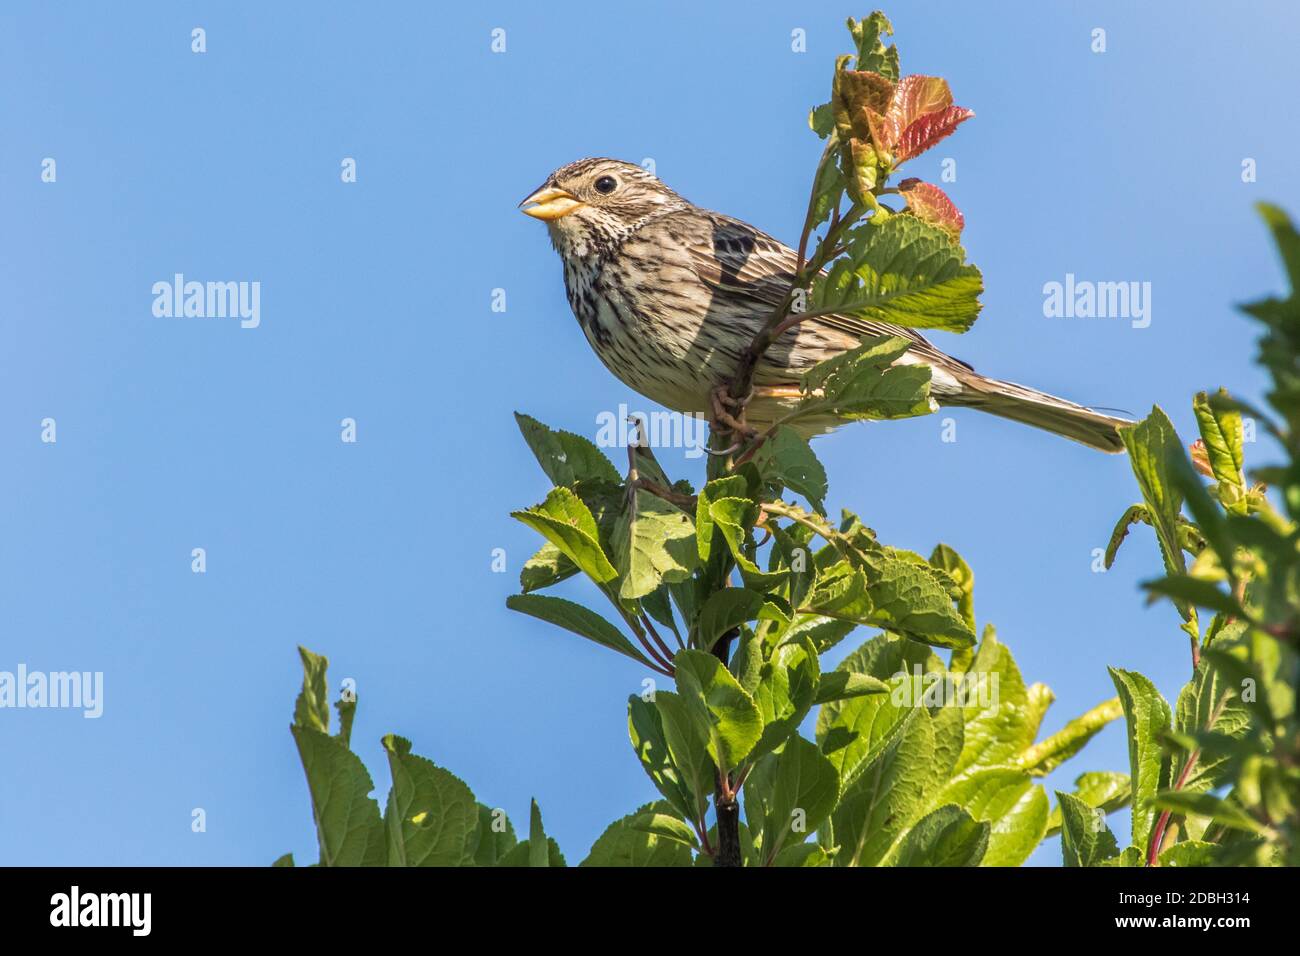 A corn bunting is sitting on the top of a shrub Stock Photo